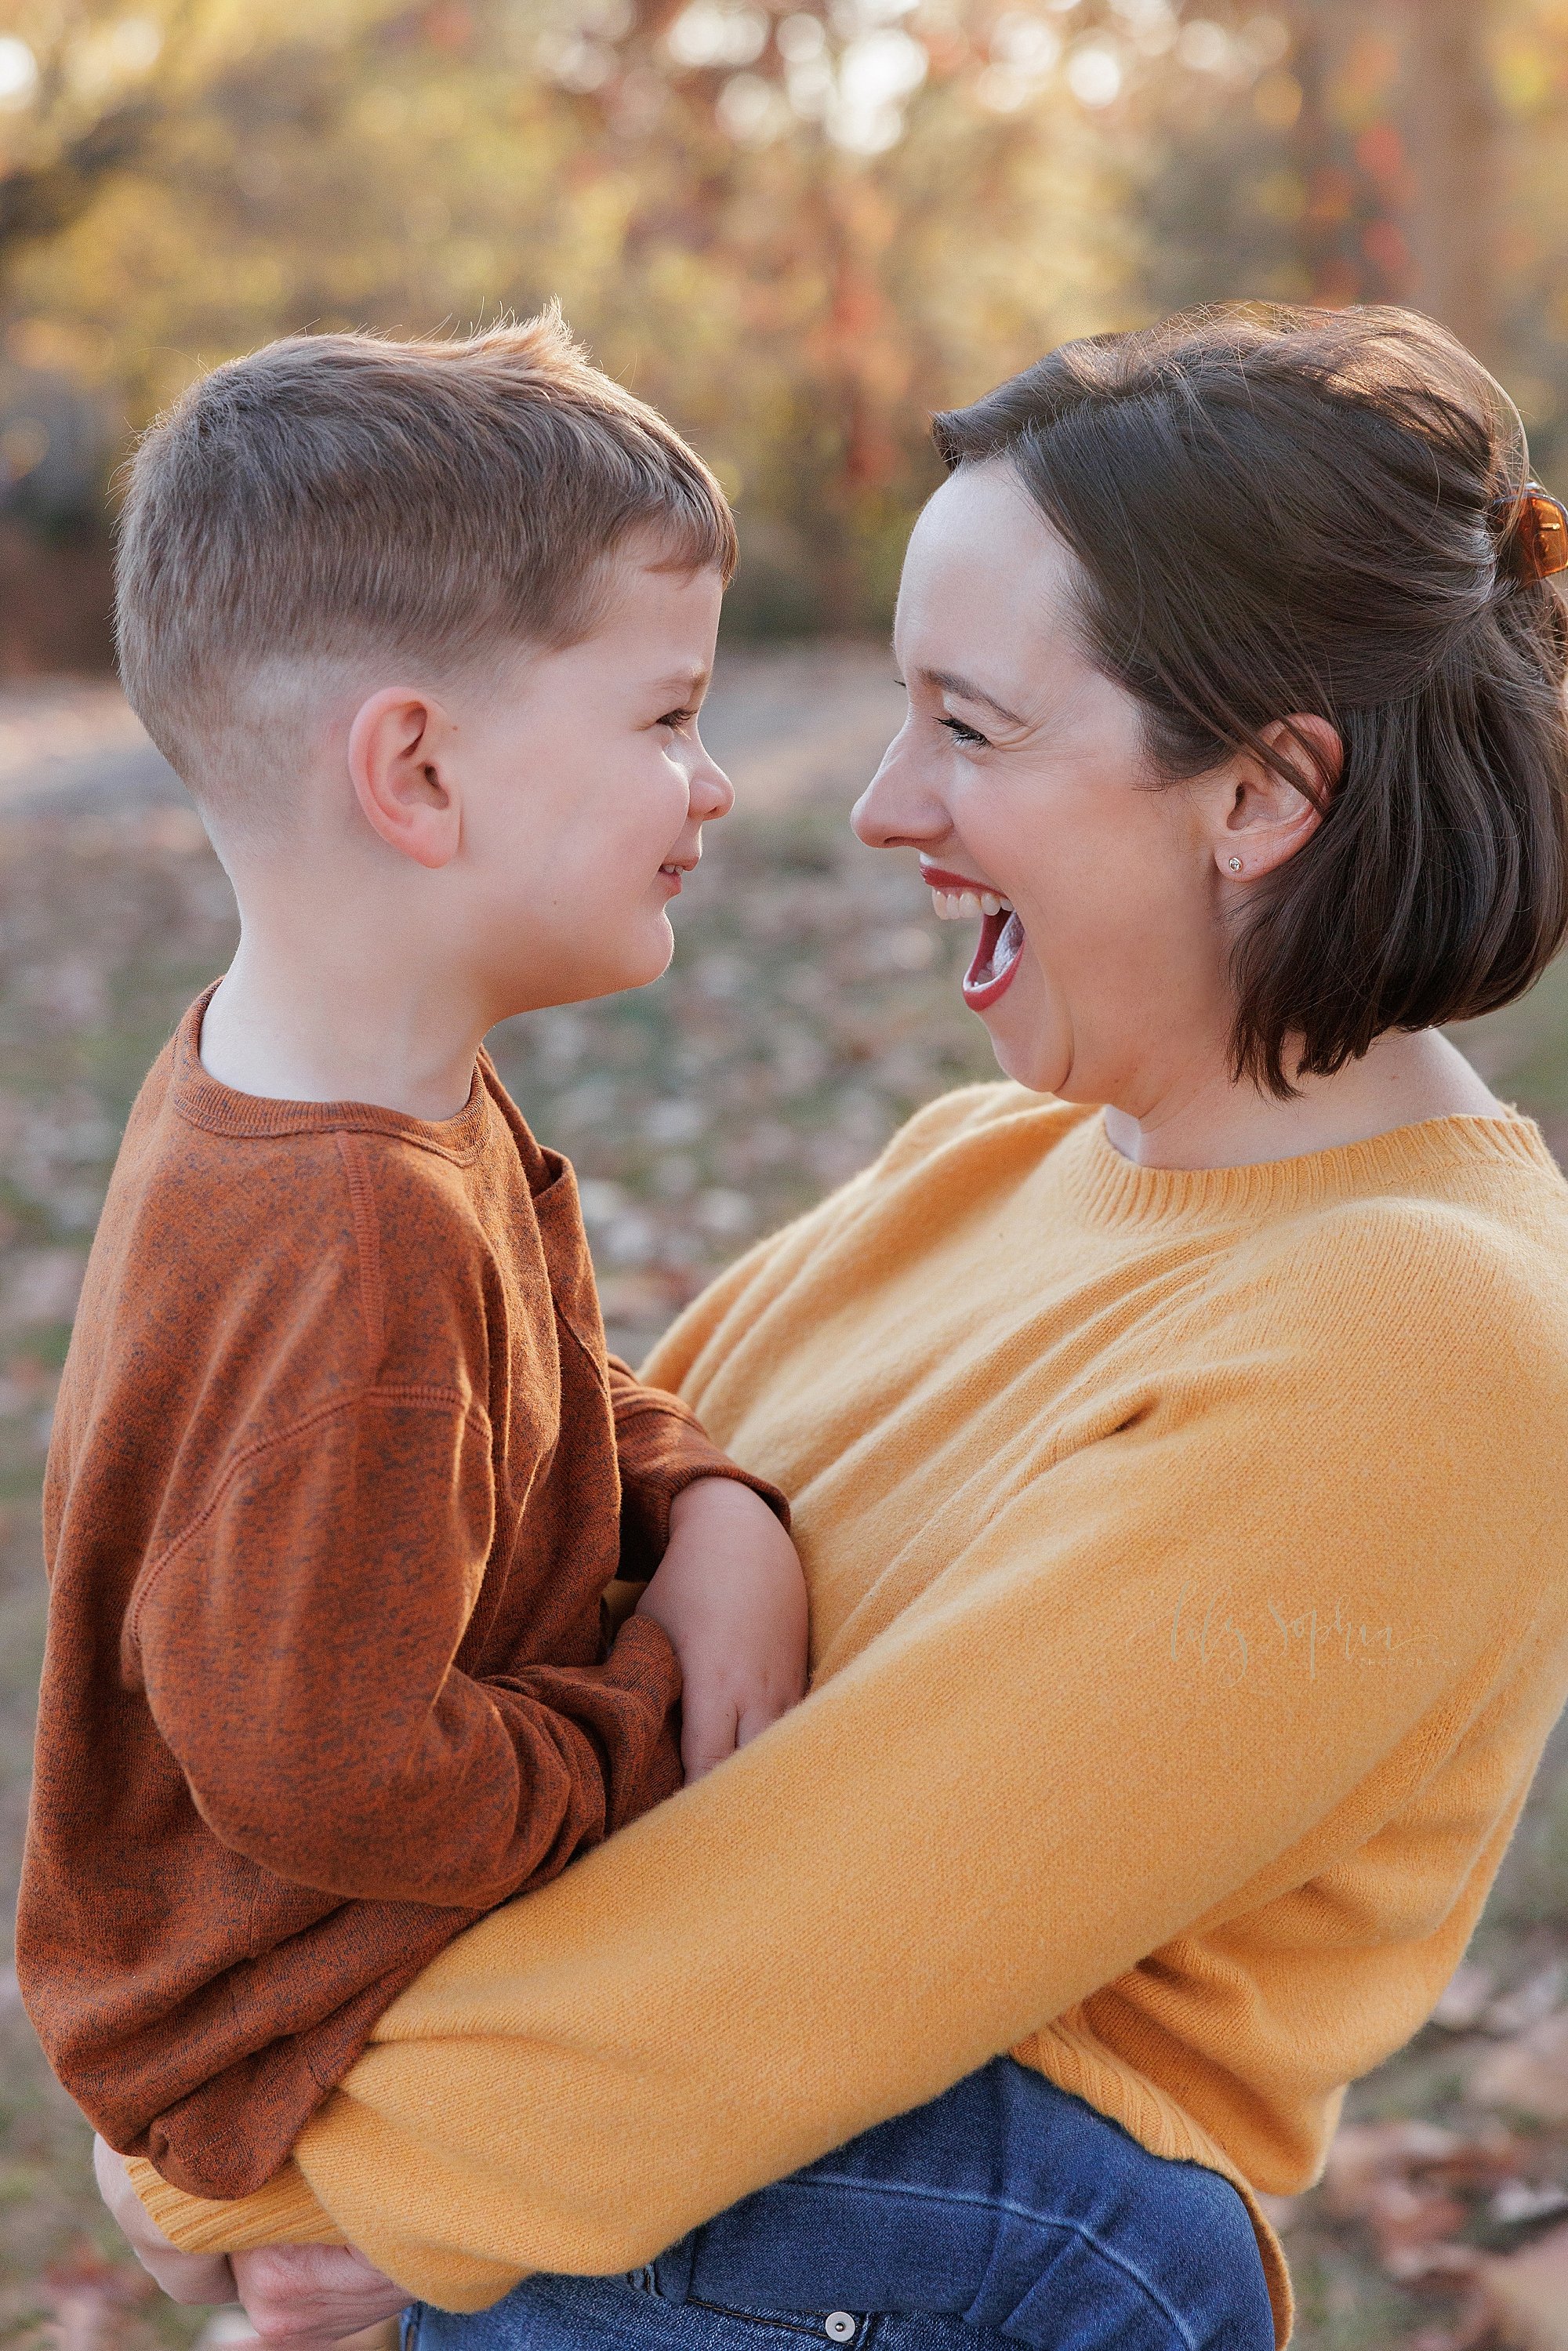  Close-up family portrait of a mother holding her young son as they talk and laugh together in an Atlanta park at sunset. 